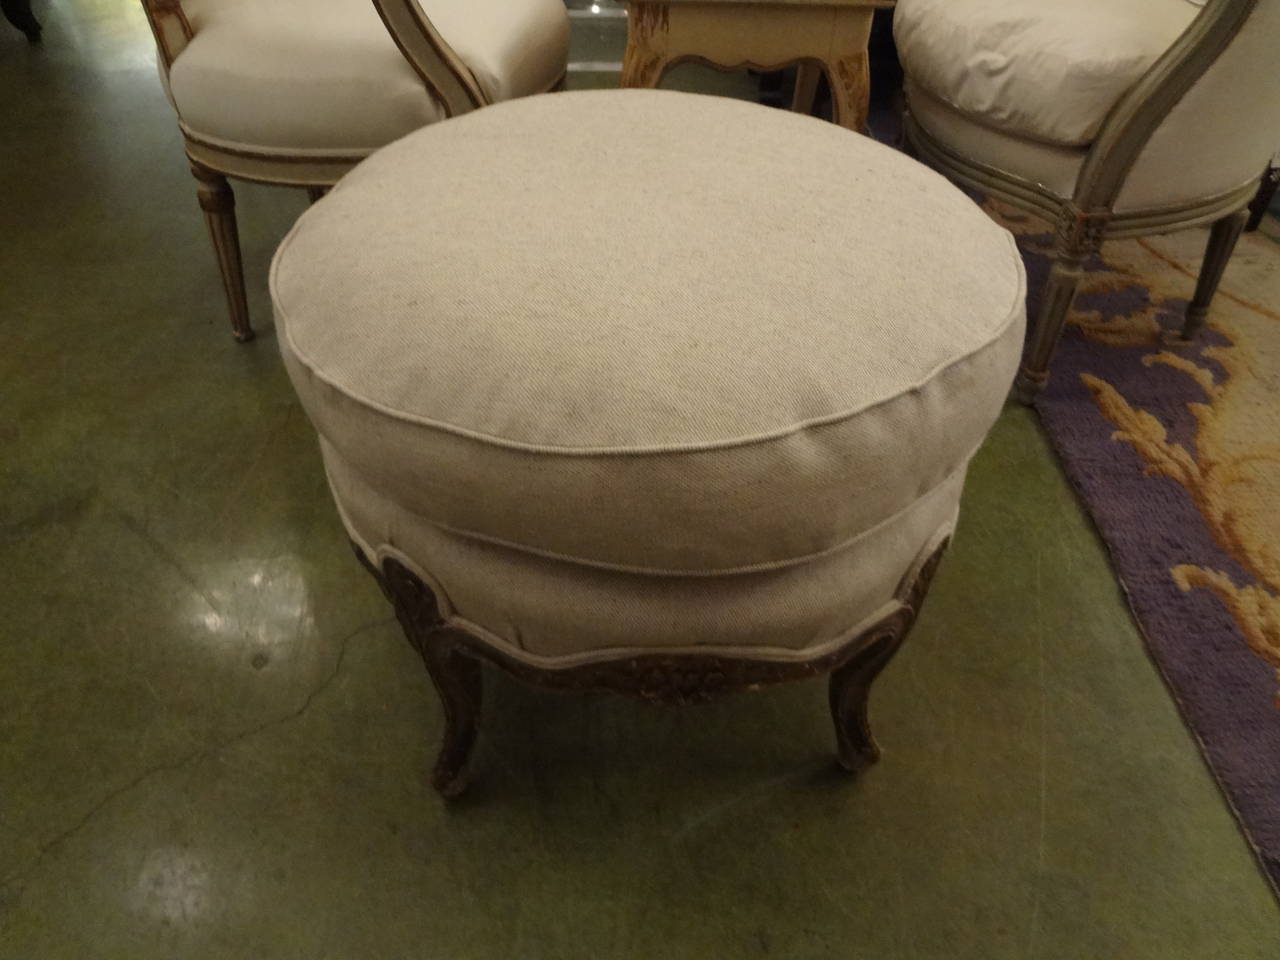 Lovely French Louis XV style Pouf/stool/Tabouret from the 19th century,
newly upholstered in linen.

Please click KIRBY ANTIQUES logo below to view additional pieces from our vast inventory.